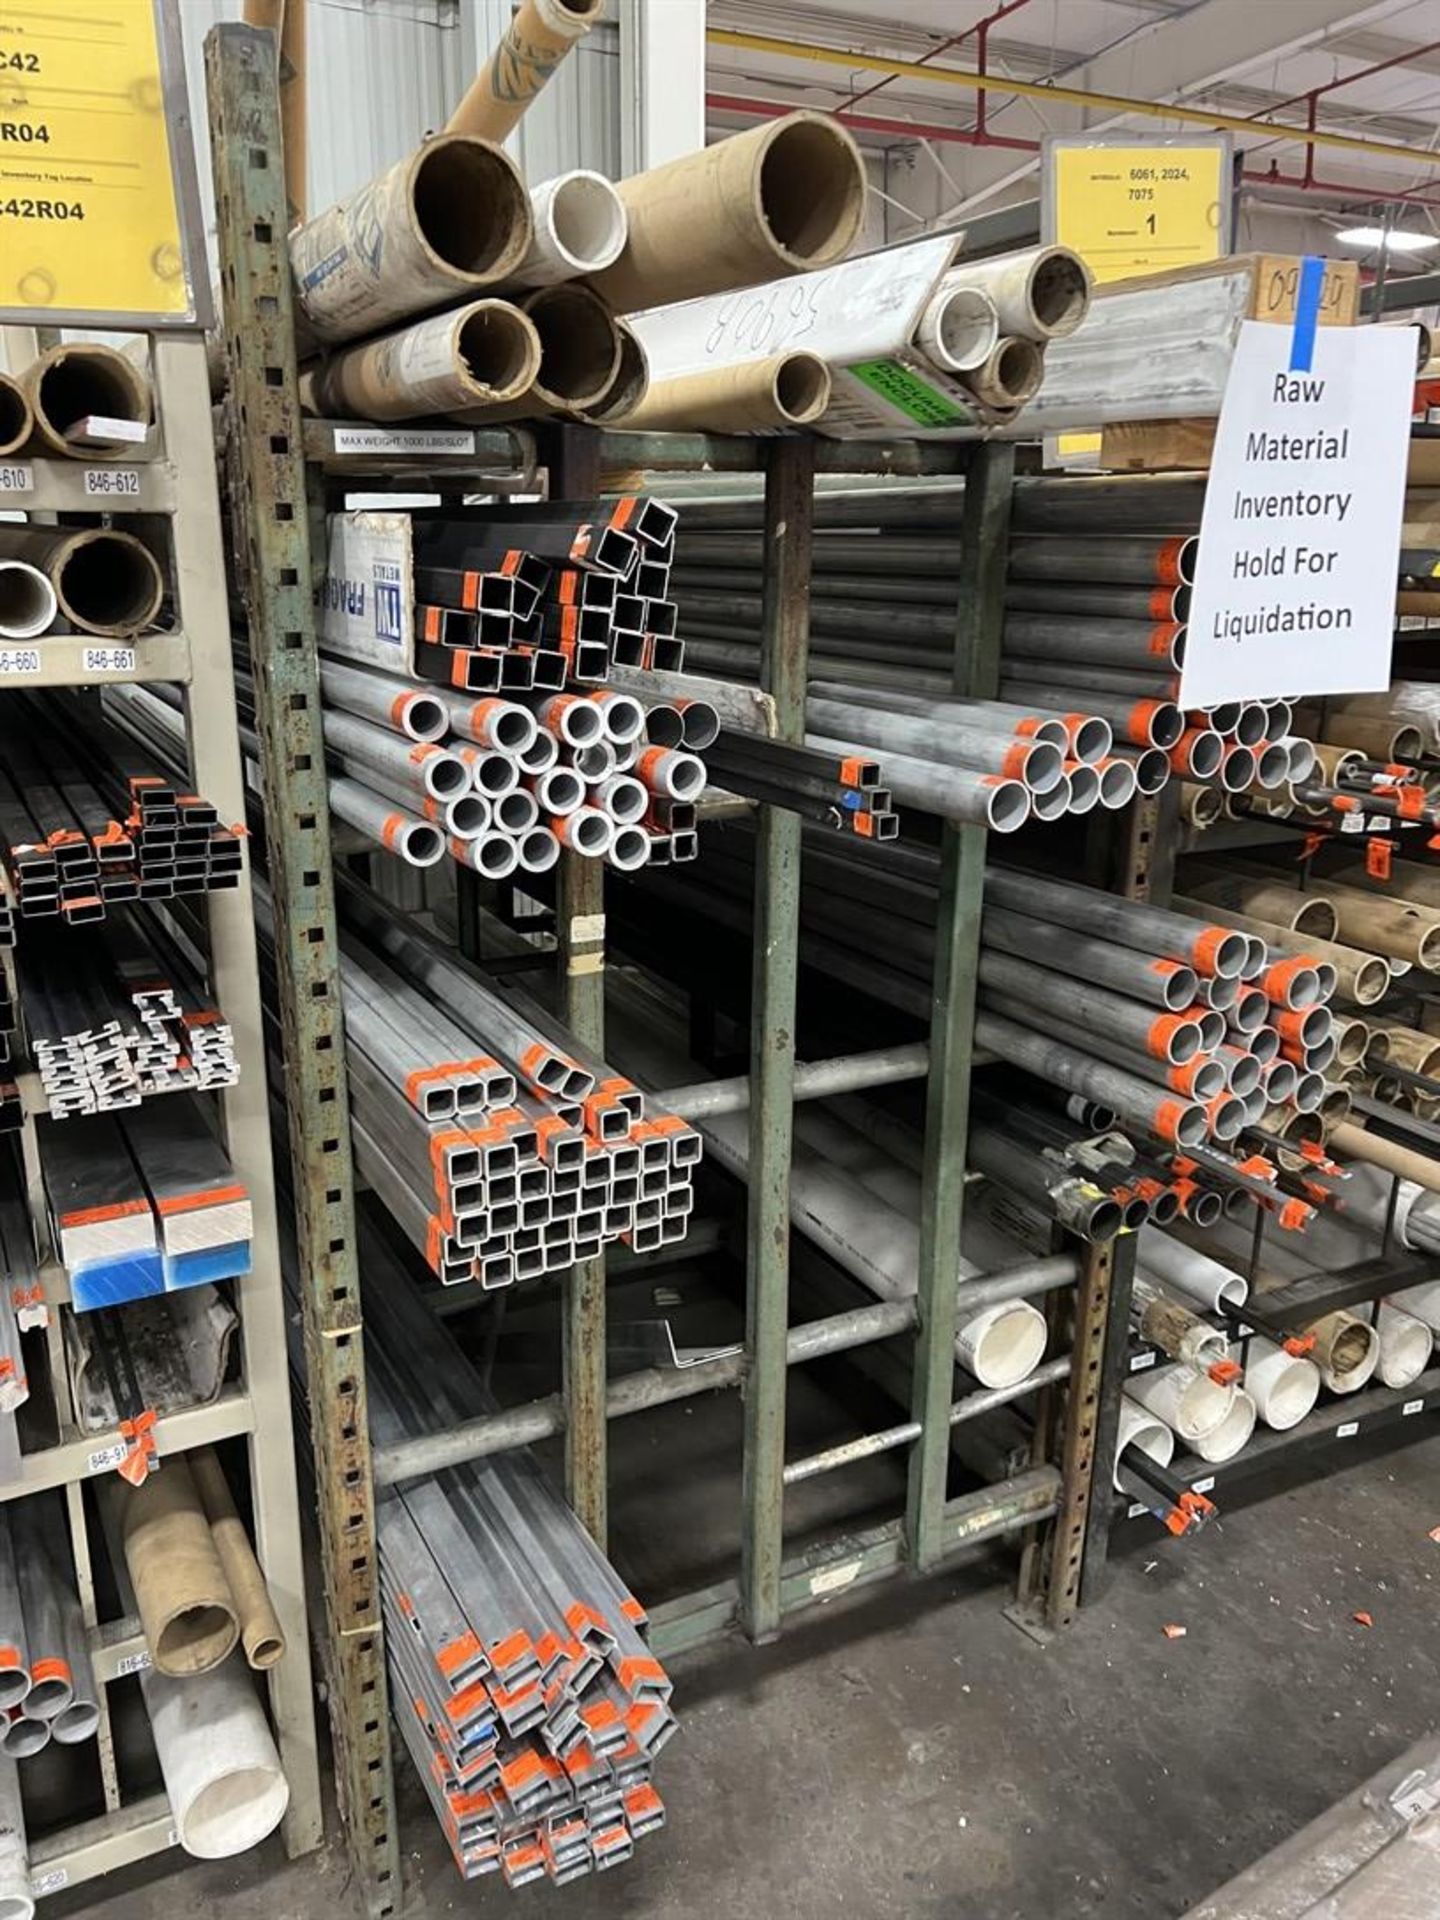 Lot of Stock Racks w/ Assorted Stock Including Aluminum and Steel Flat stock, Round Tubing, and - Image 5 of 7